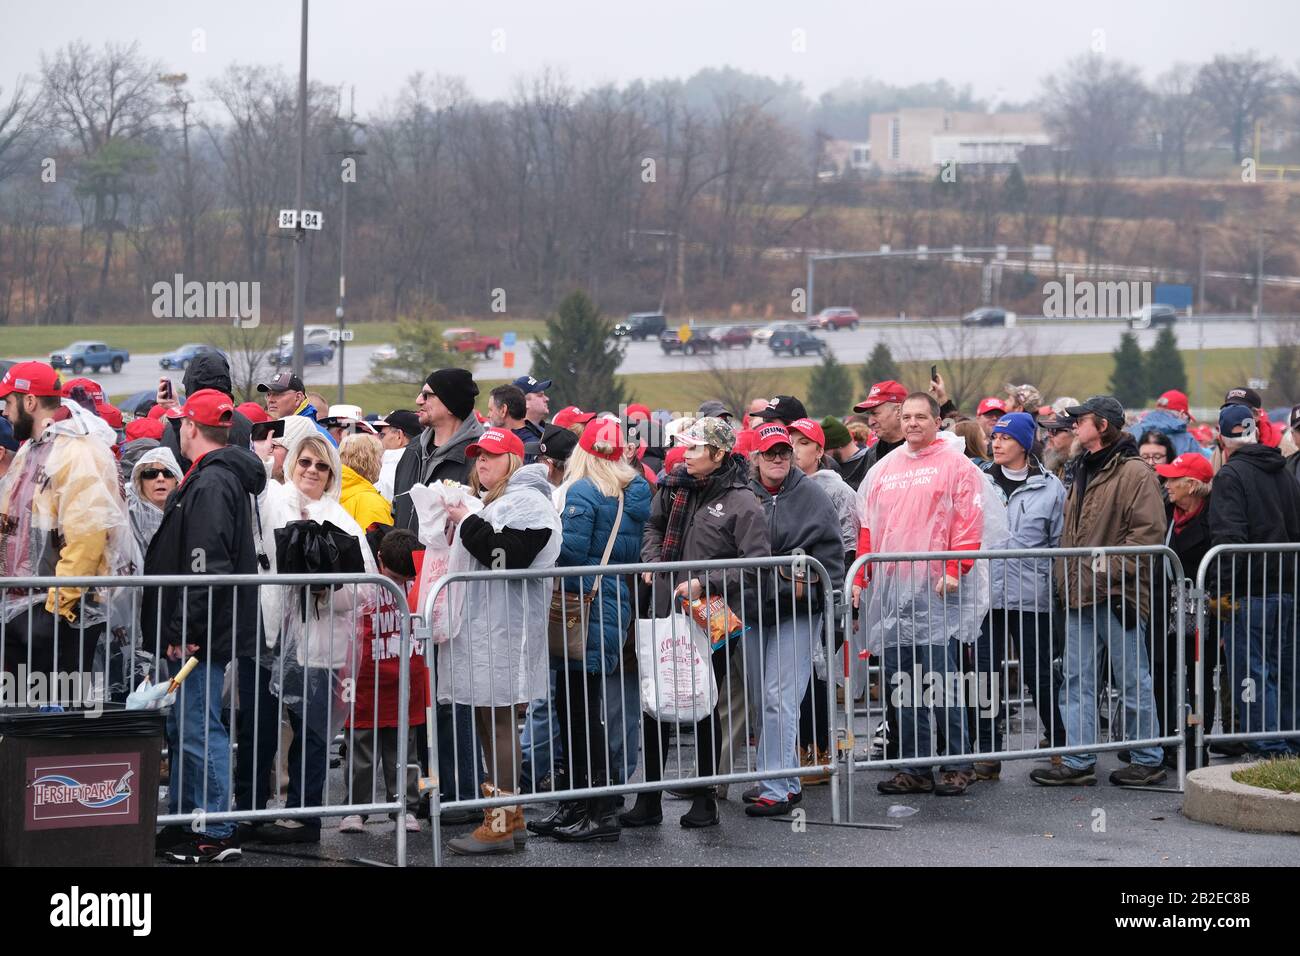 Supporters of President Donald Trump wait in line before a 2020 campaign rally Dec. 10, 2019, at Giant Center in Hershey, PA. Stock Photo